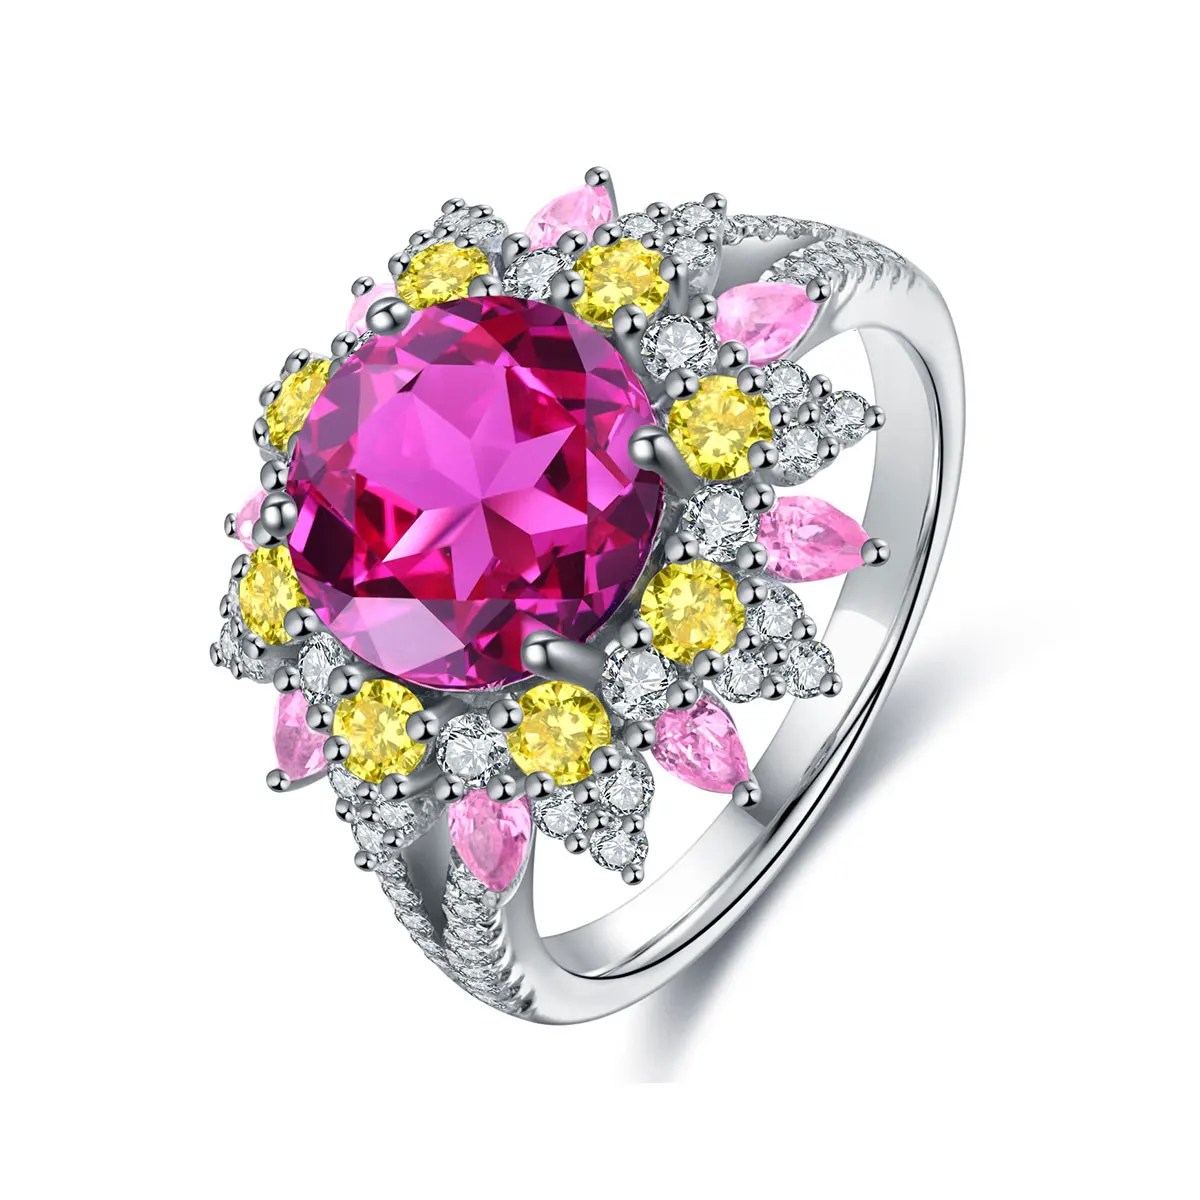 

Anster jewelry s925 sterling silver ring for women lab grown sapphire gemstone fine jewelry wholesale price, Pink